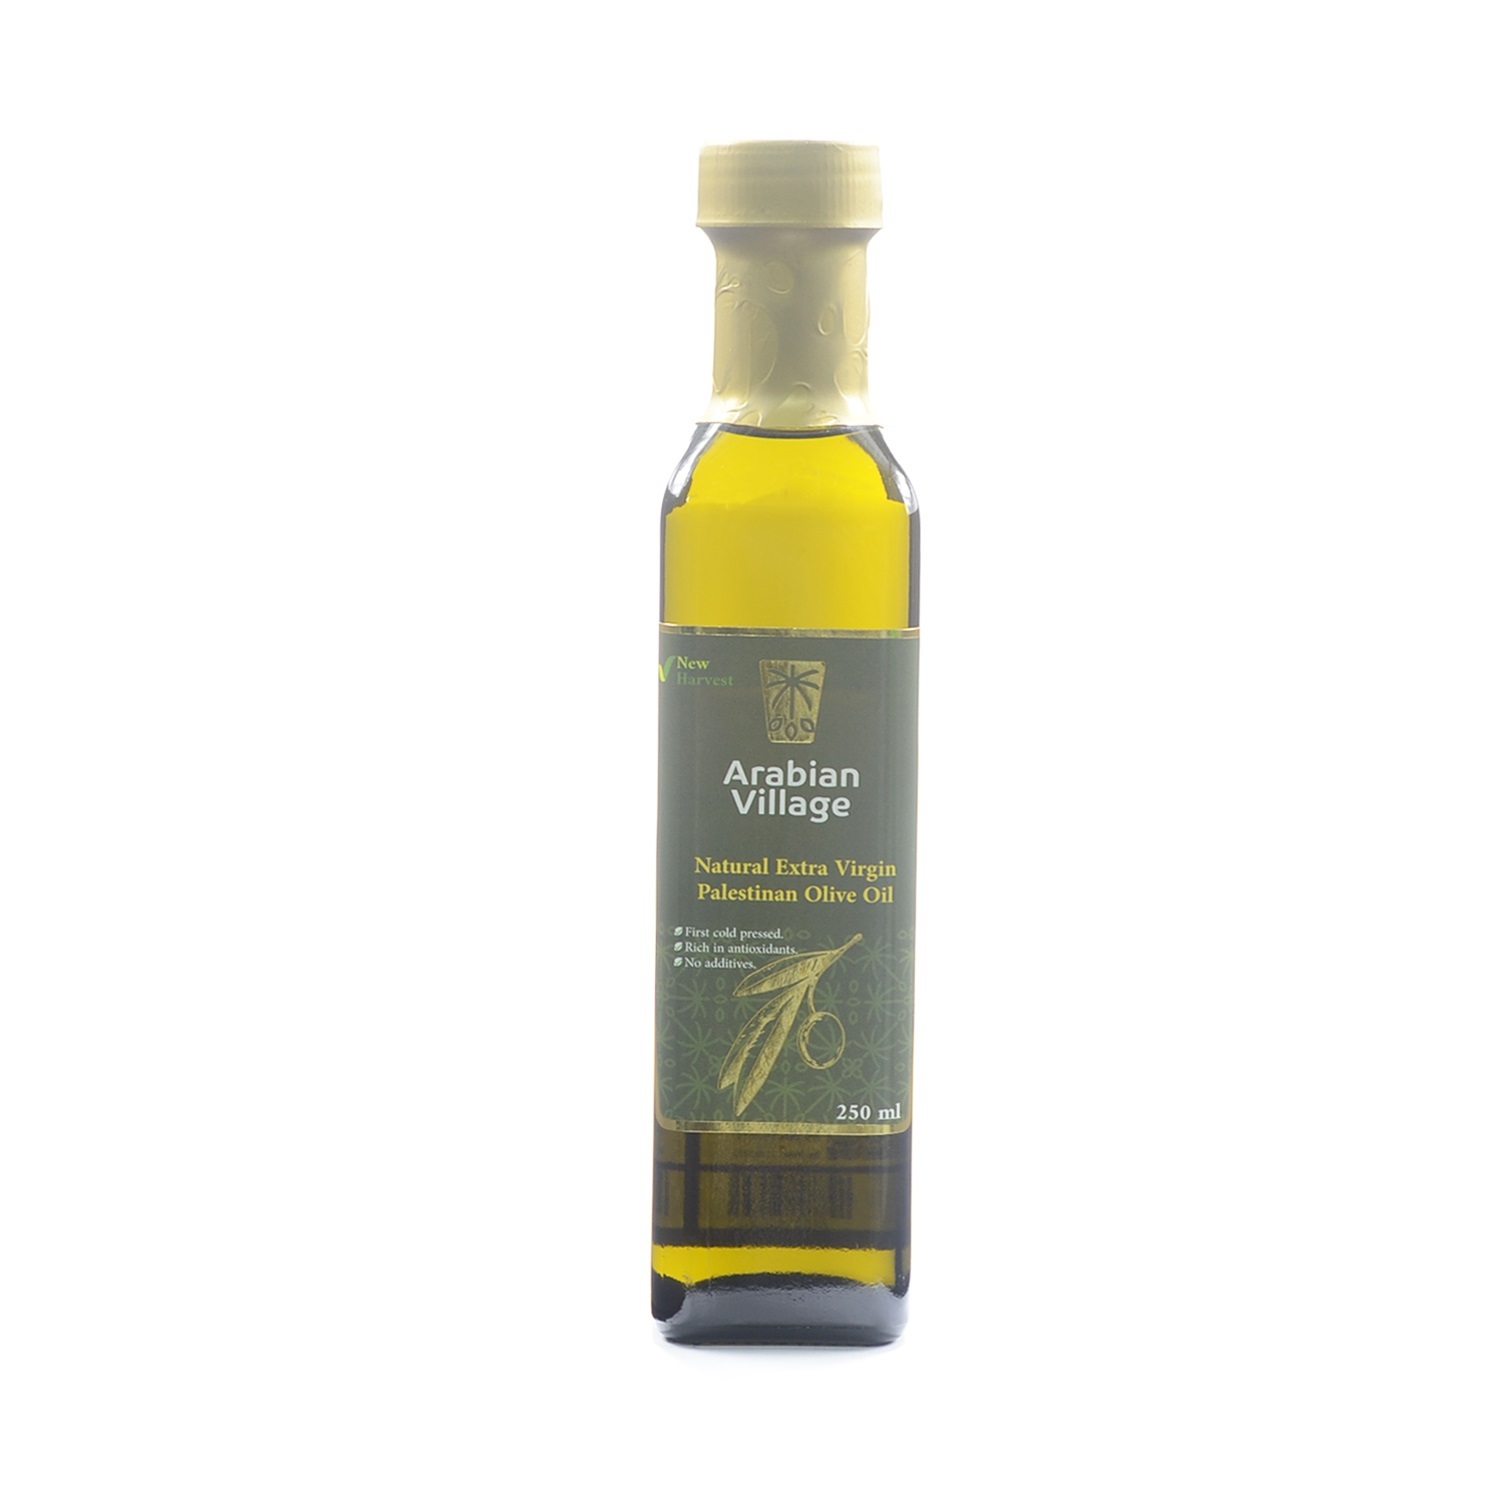 Natural-extra-virgin-palestinian-olive-oil-250ml